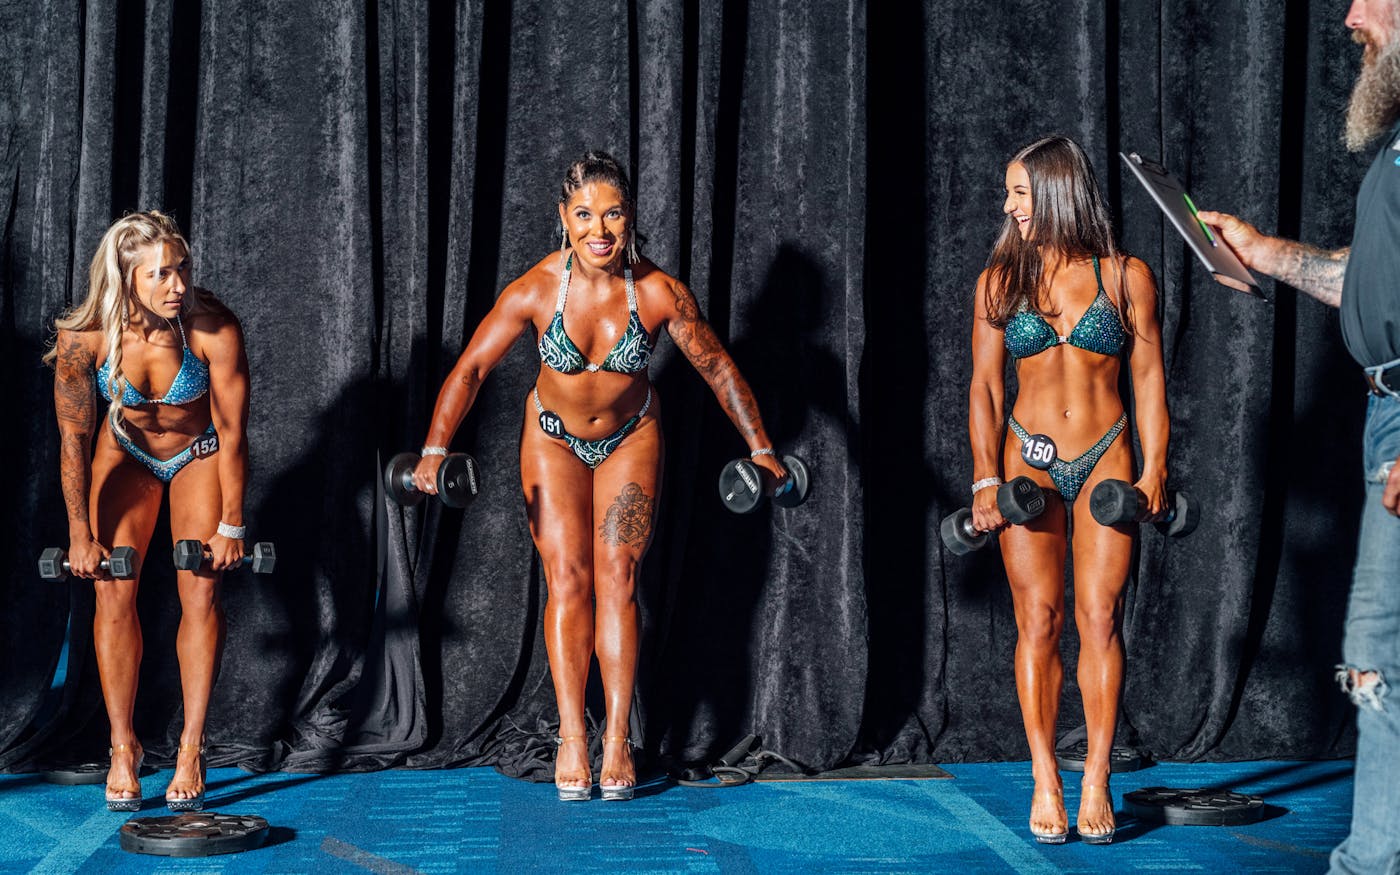 https://img.texasmonthly.com/2022/07/alphaland-fitness-competition.jpg?auto=compress&crop=faces&fit=crop&fm=jpg&h=1050&ixlib=php-3.3.1&q=45&w=1400